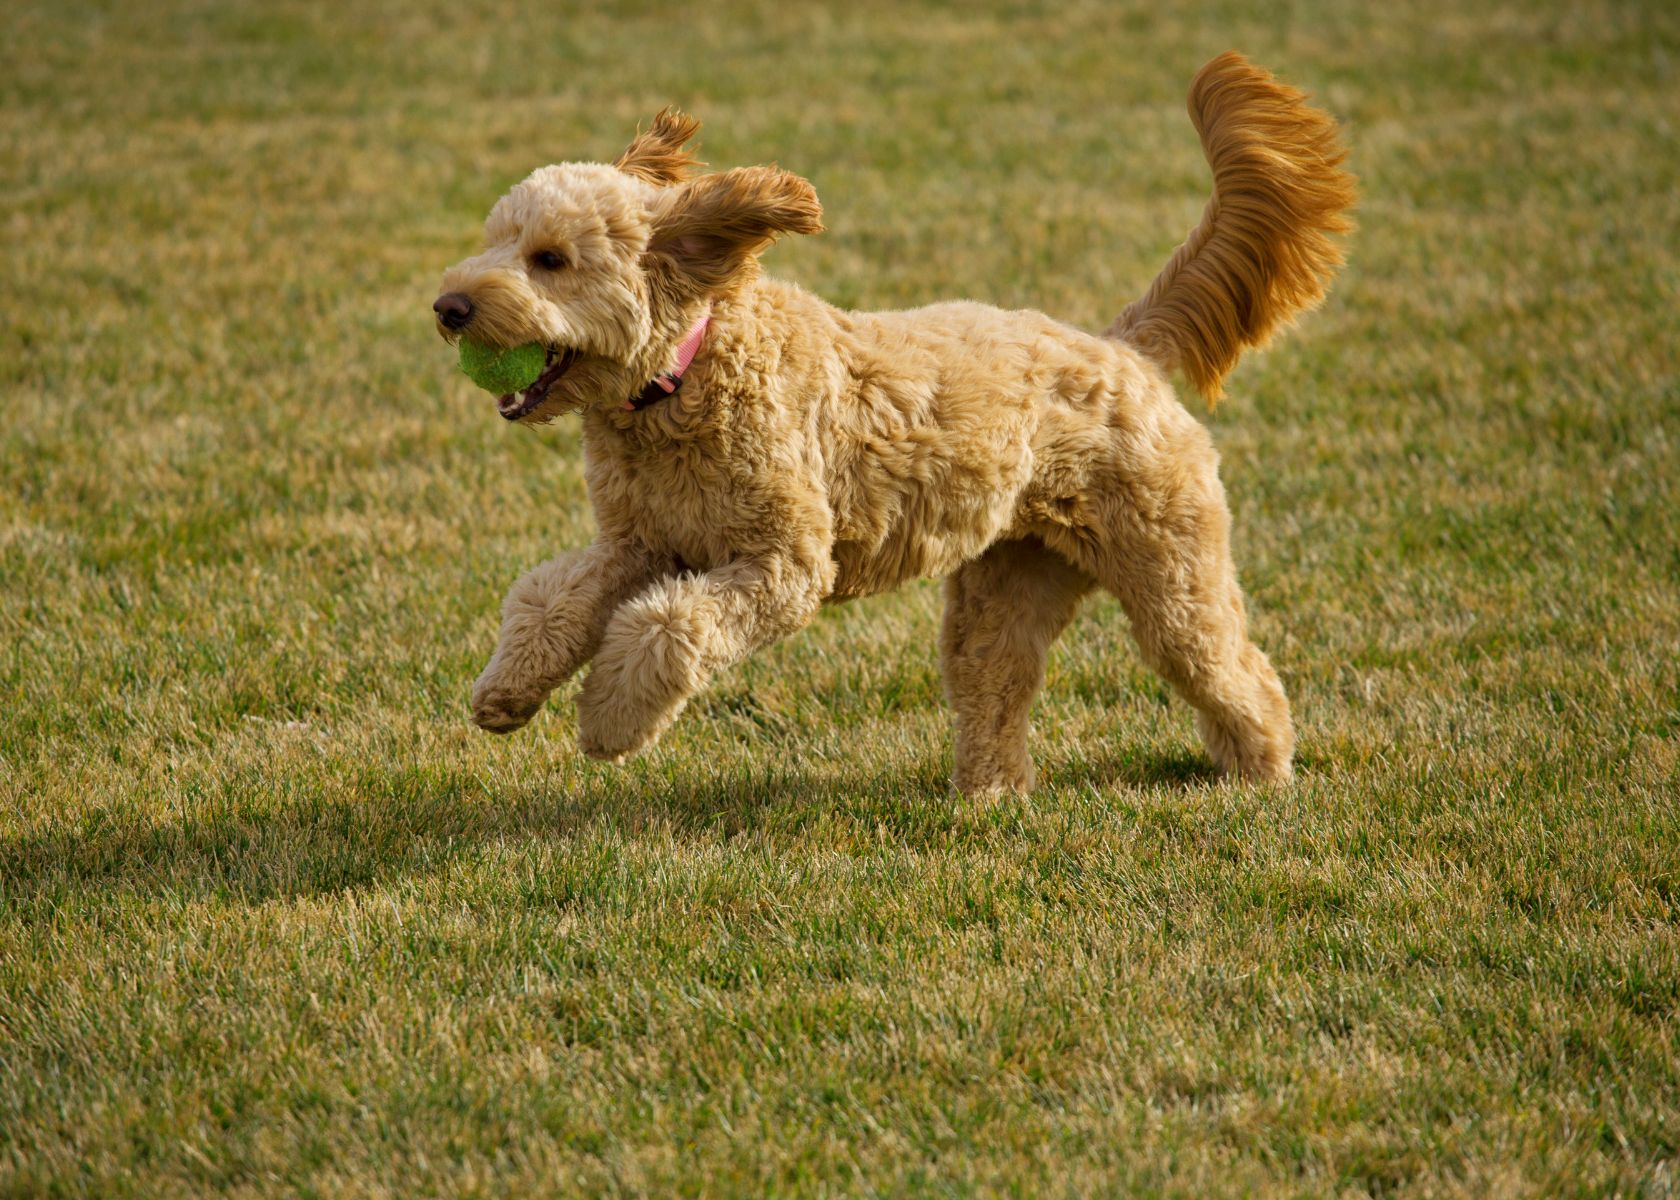 Average Running Speed of Goldendoodles Breed